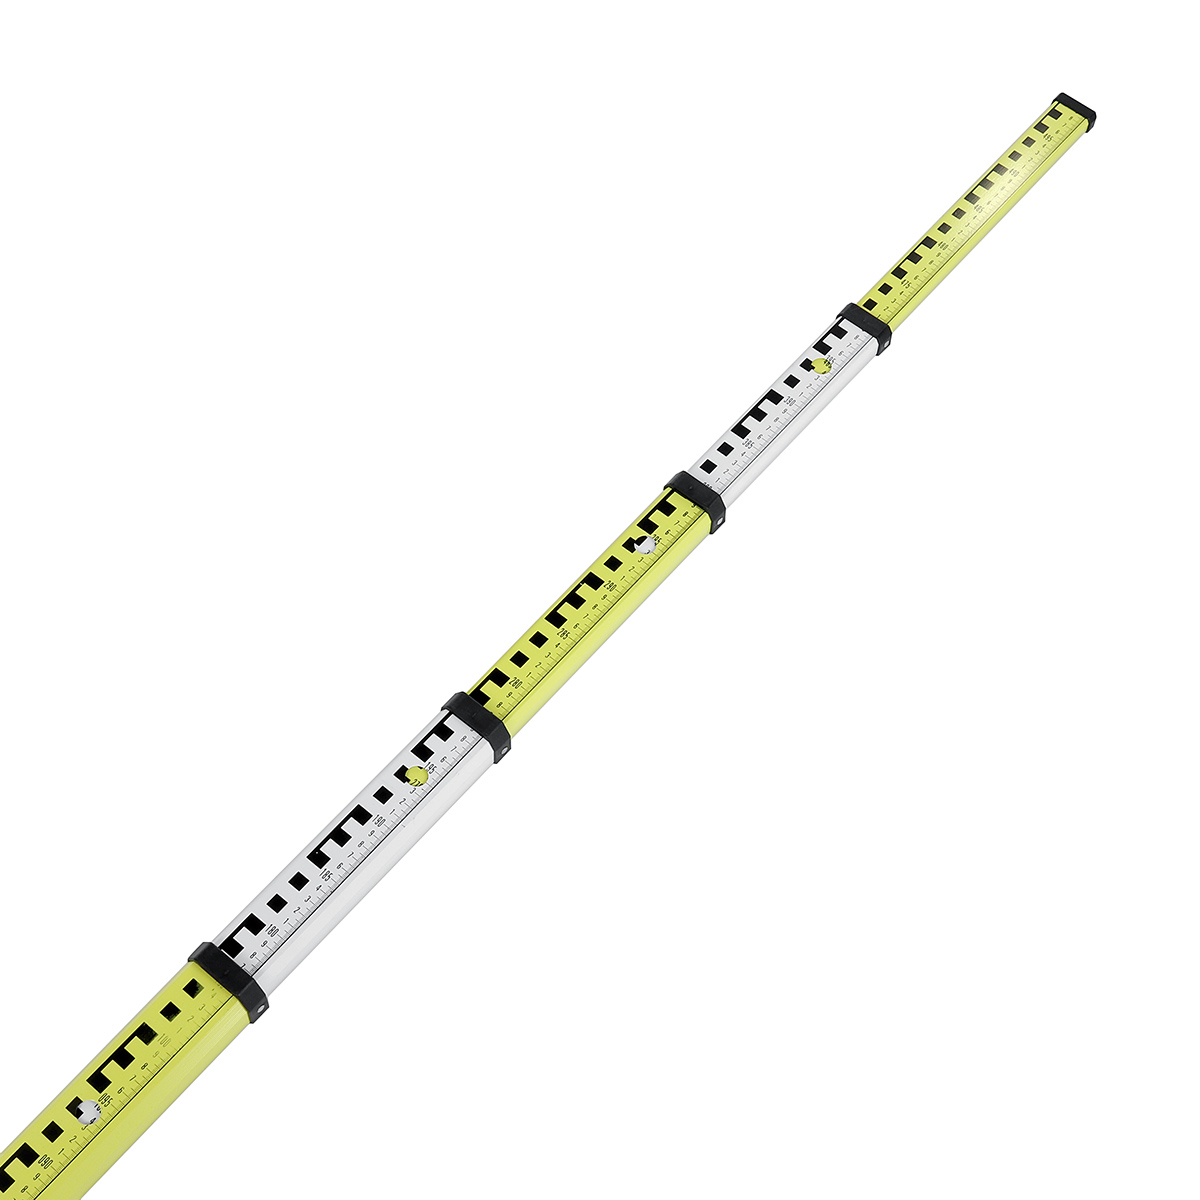 Thickened-Aluminum-Alloy-3-Meters-5-Meters-7-Meters-Tower-Ruler-Ruler-Measuring-Tool-Thickened-Fixed-1895358-2